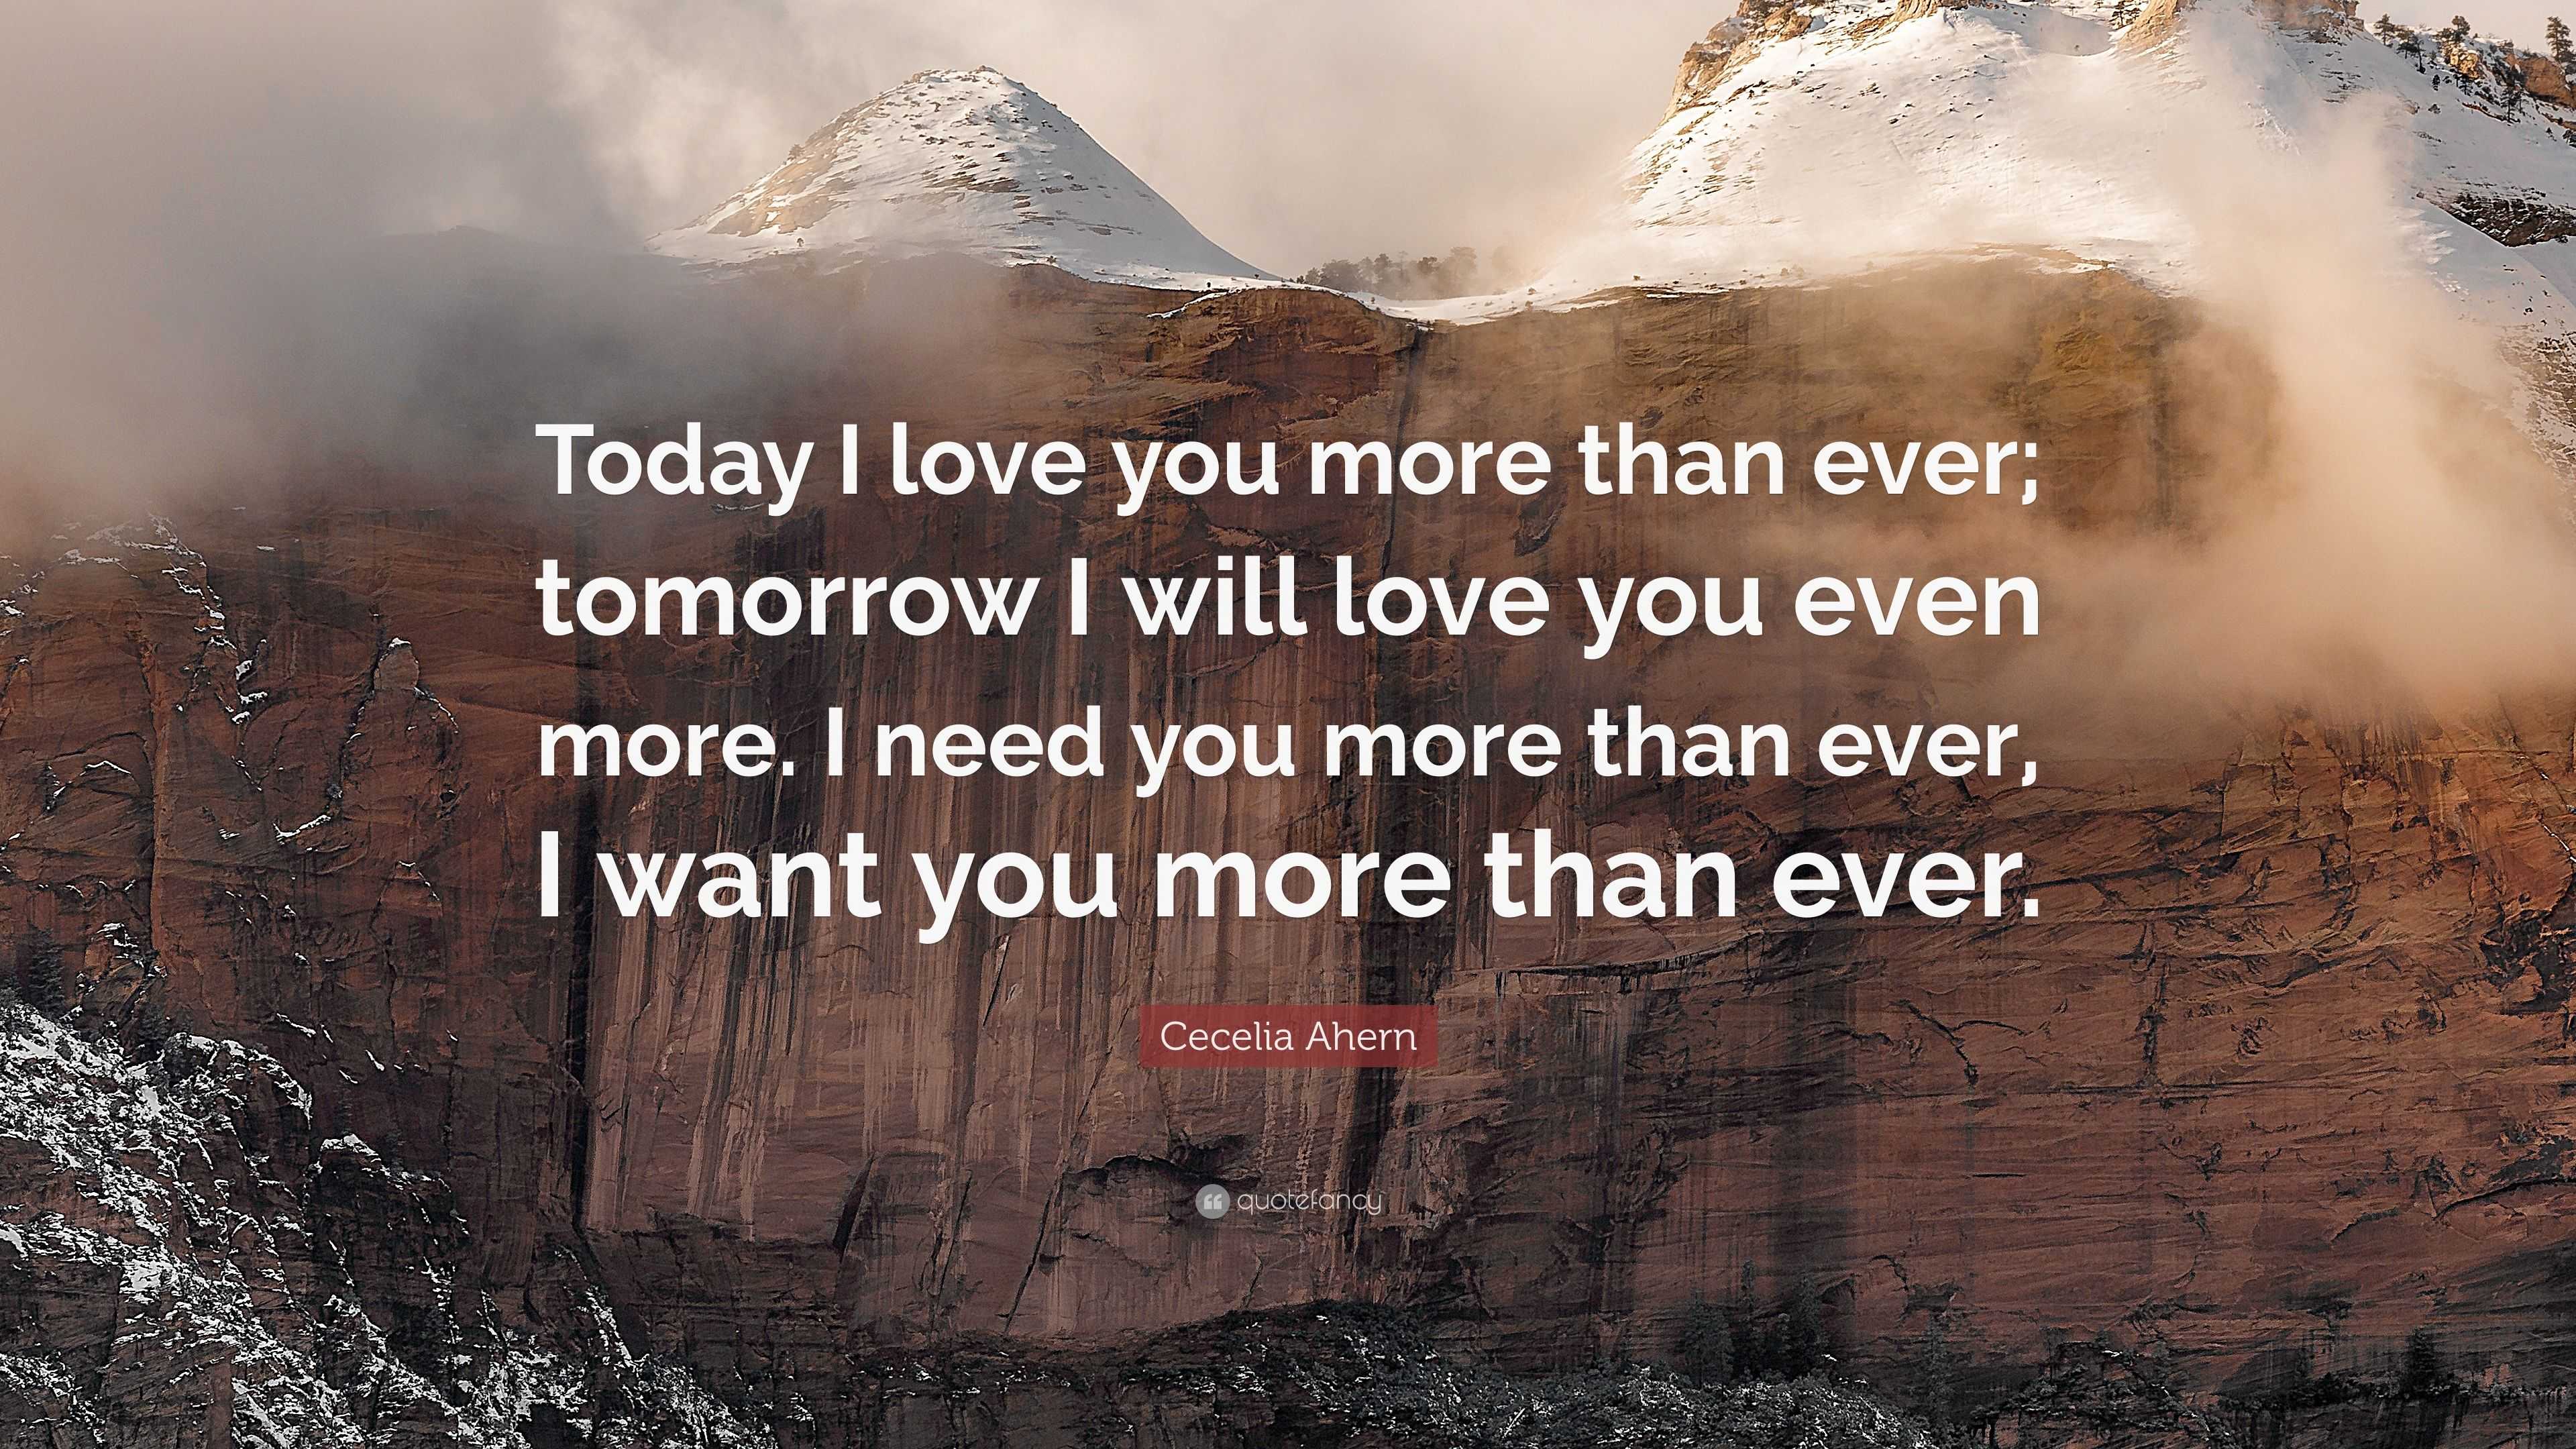 Cecelia Ahern Quote “Today I love you more than ever